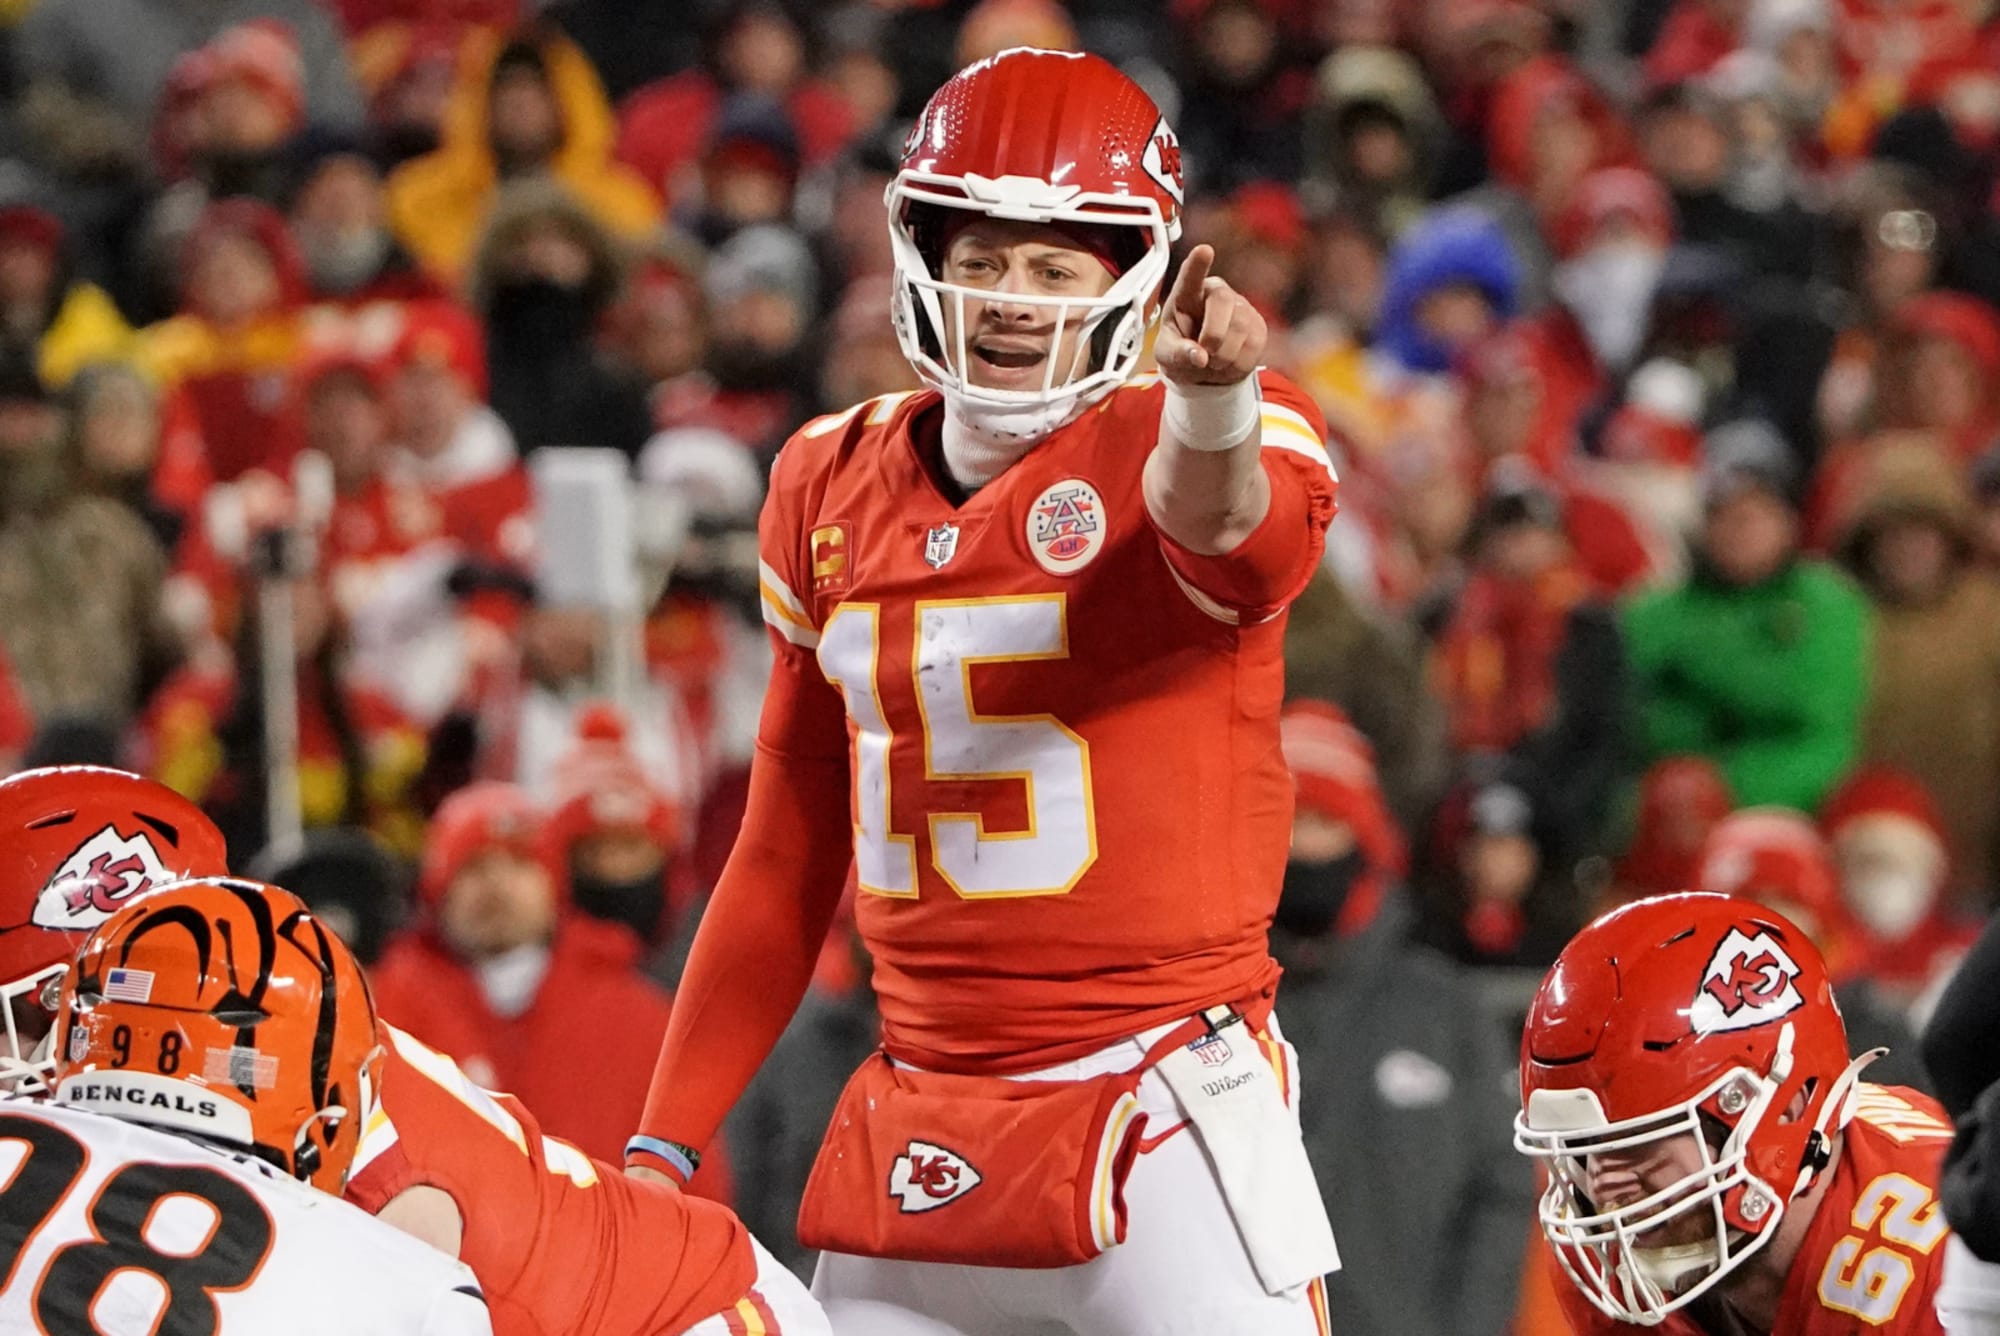 Chiefs vs. Eagles prediction and odds for Super Bowl 57 (Bet on Patrick Mahomes)